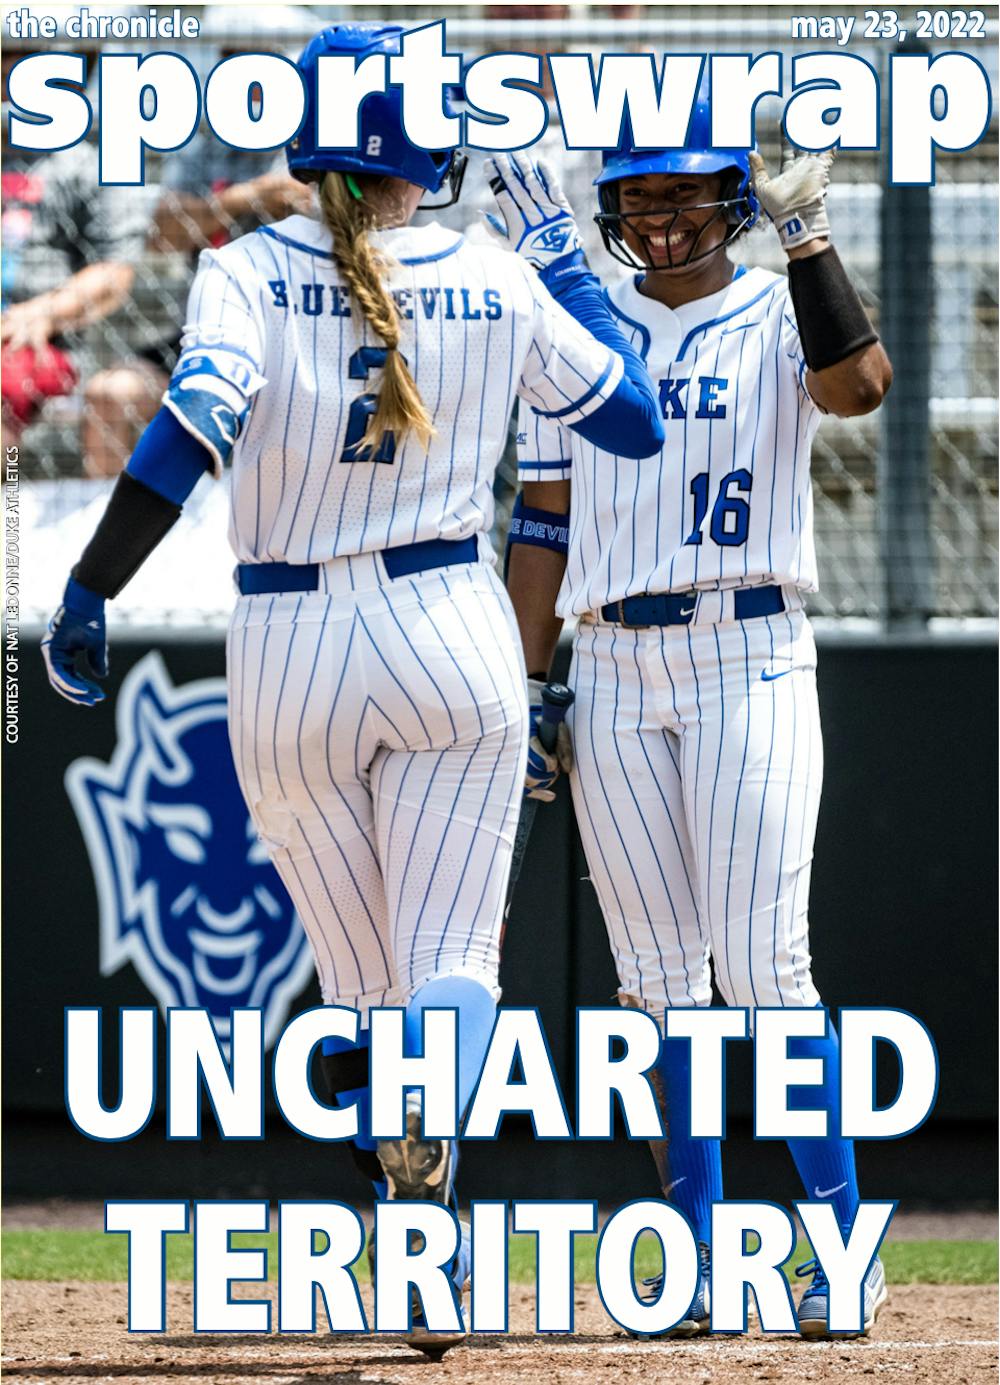 Duke softball is headed to Los Angeles for its first super regional appearance.